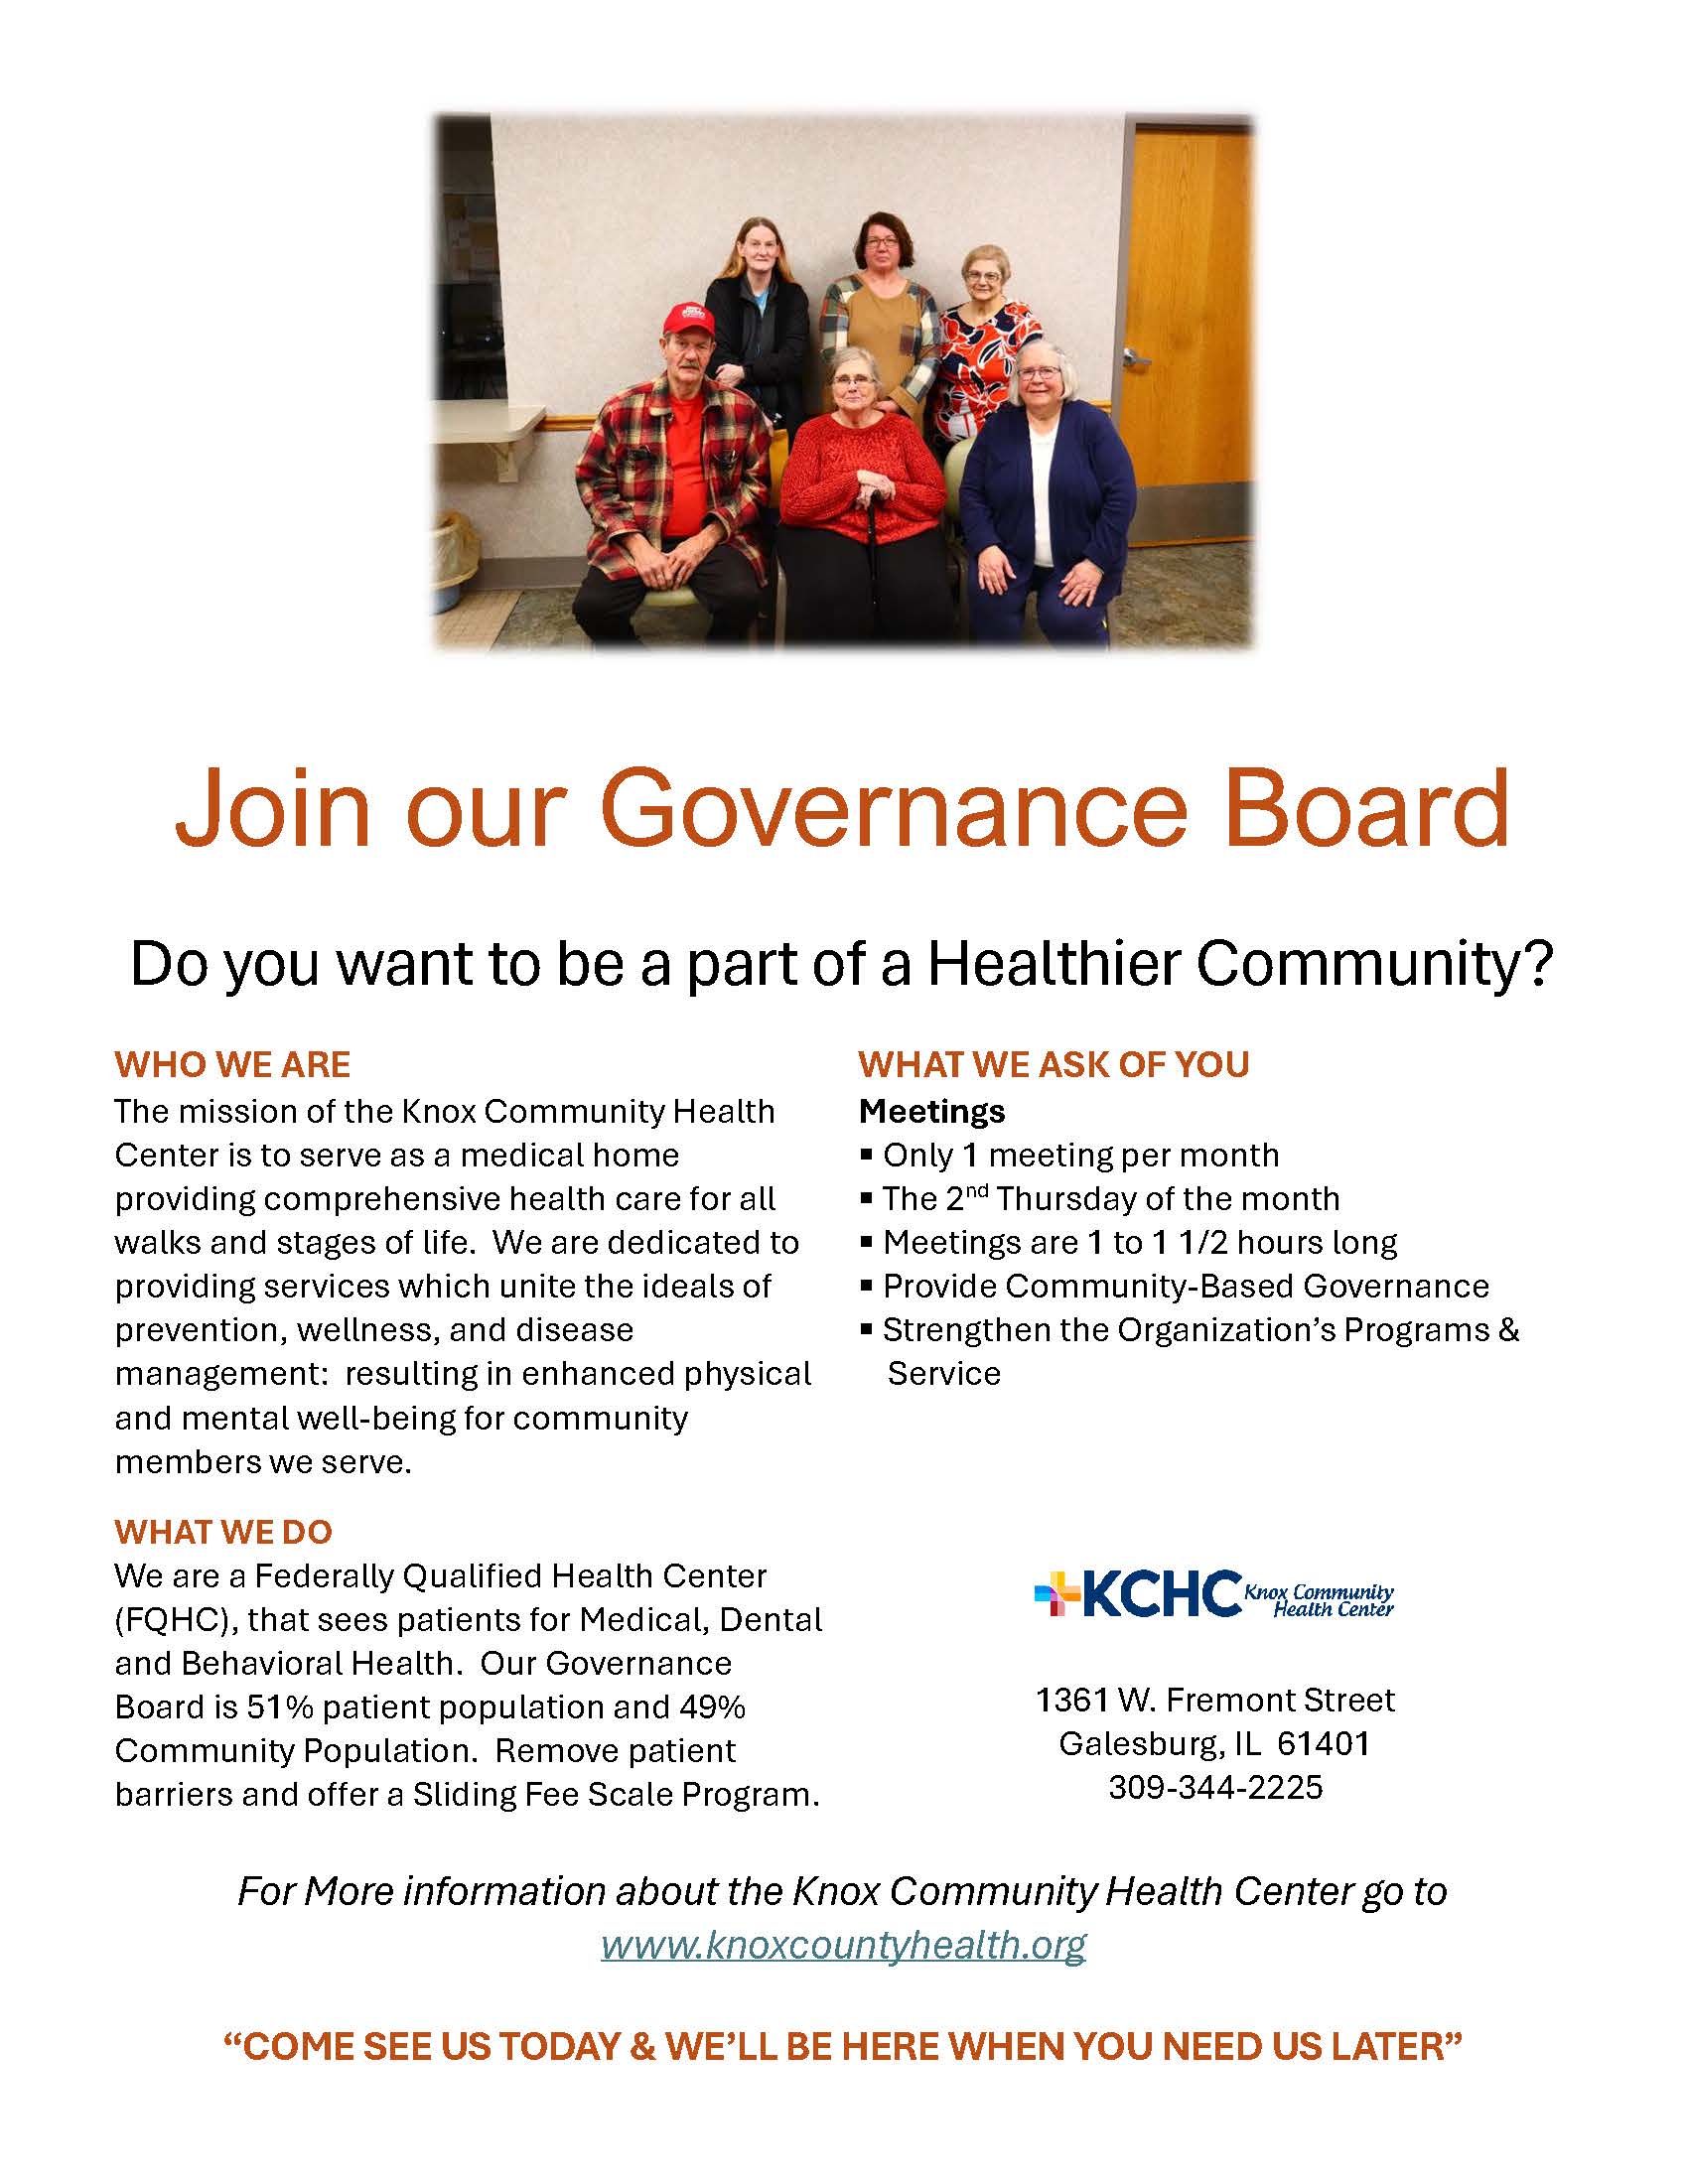 Join our Governance Board Final Flyer